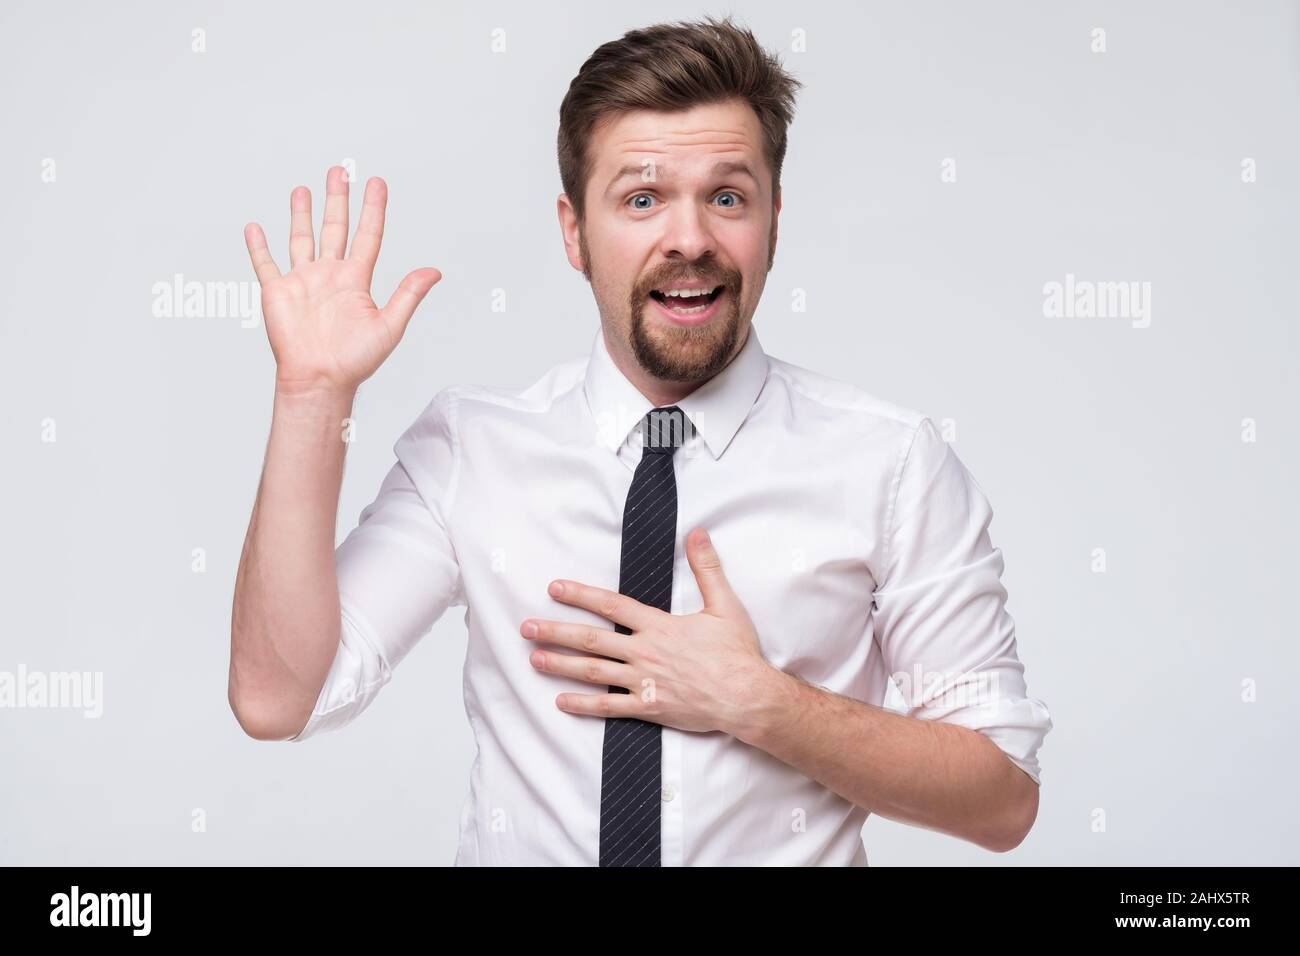 Young caucasian man in white shirt swearing with hands on chest and open palm, making a loyalty promise Stock Photo